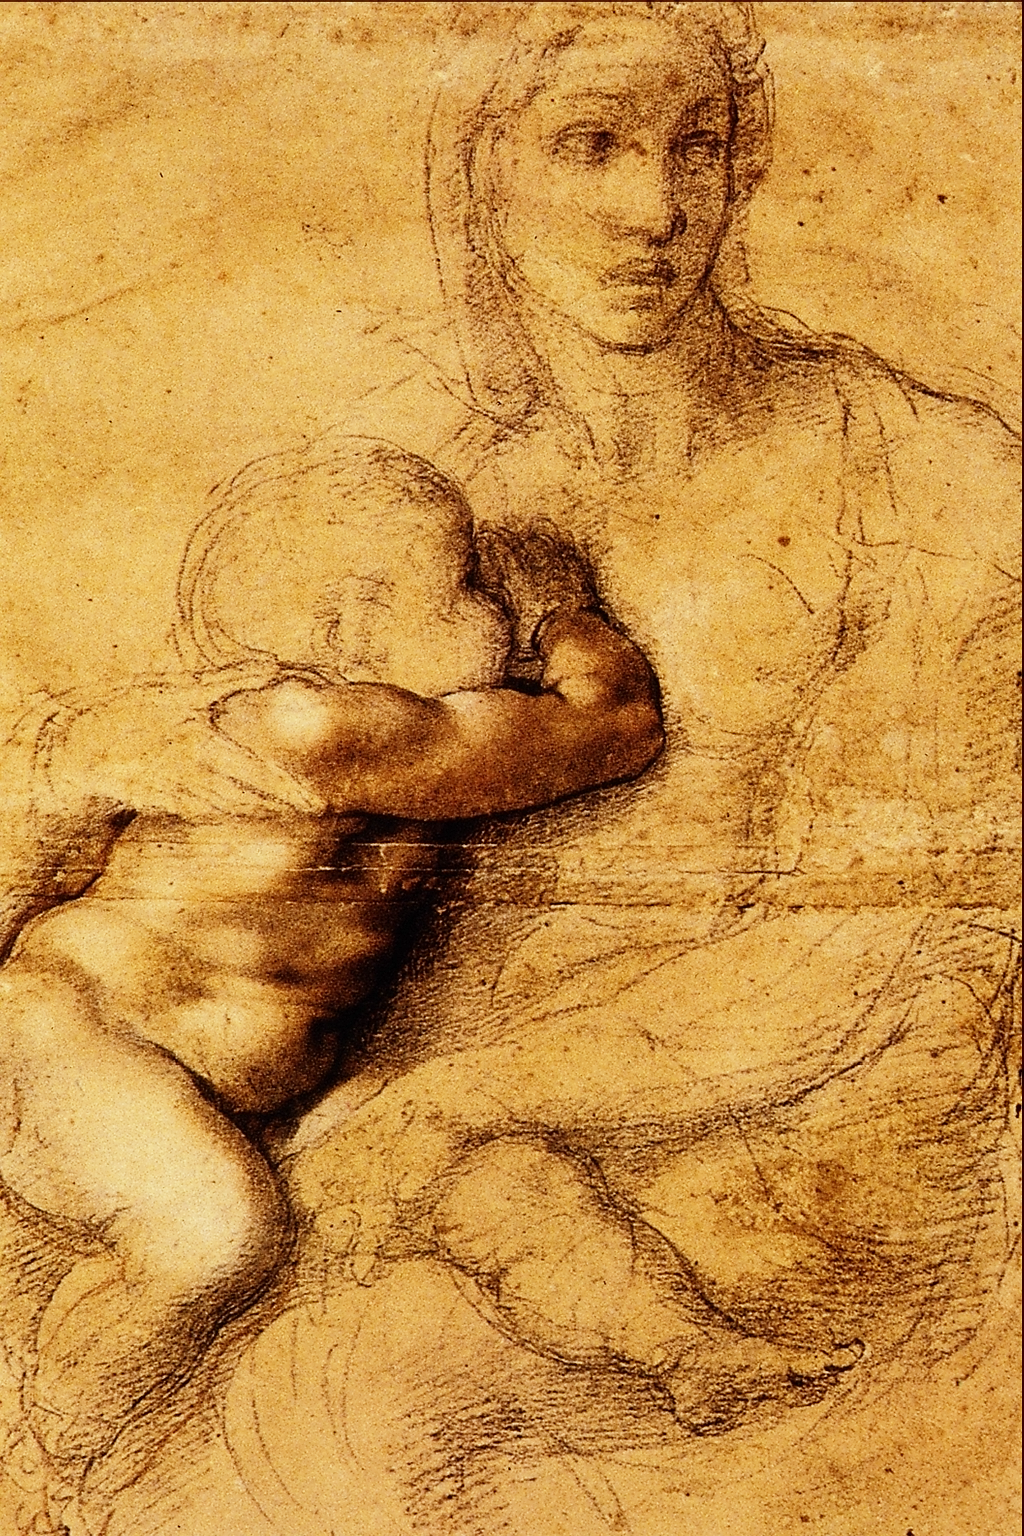 Madonna and Child by Michelangelo